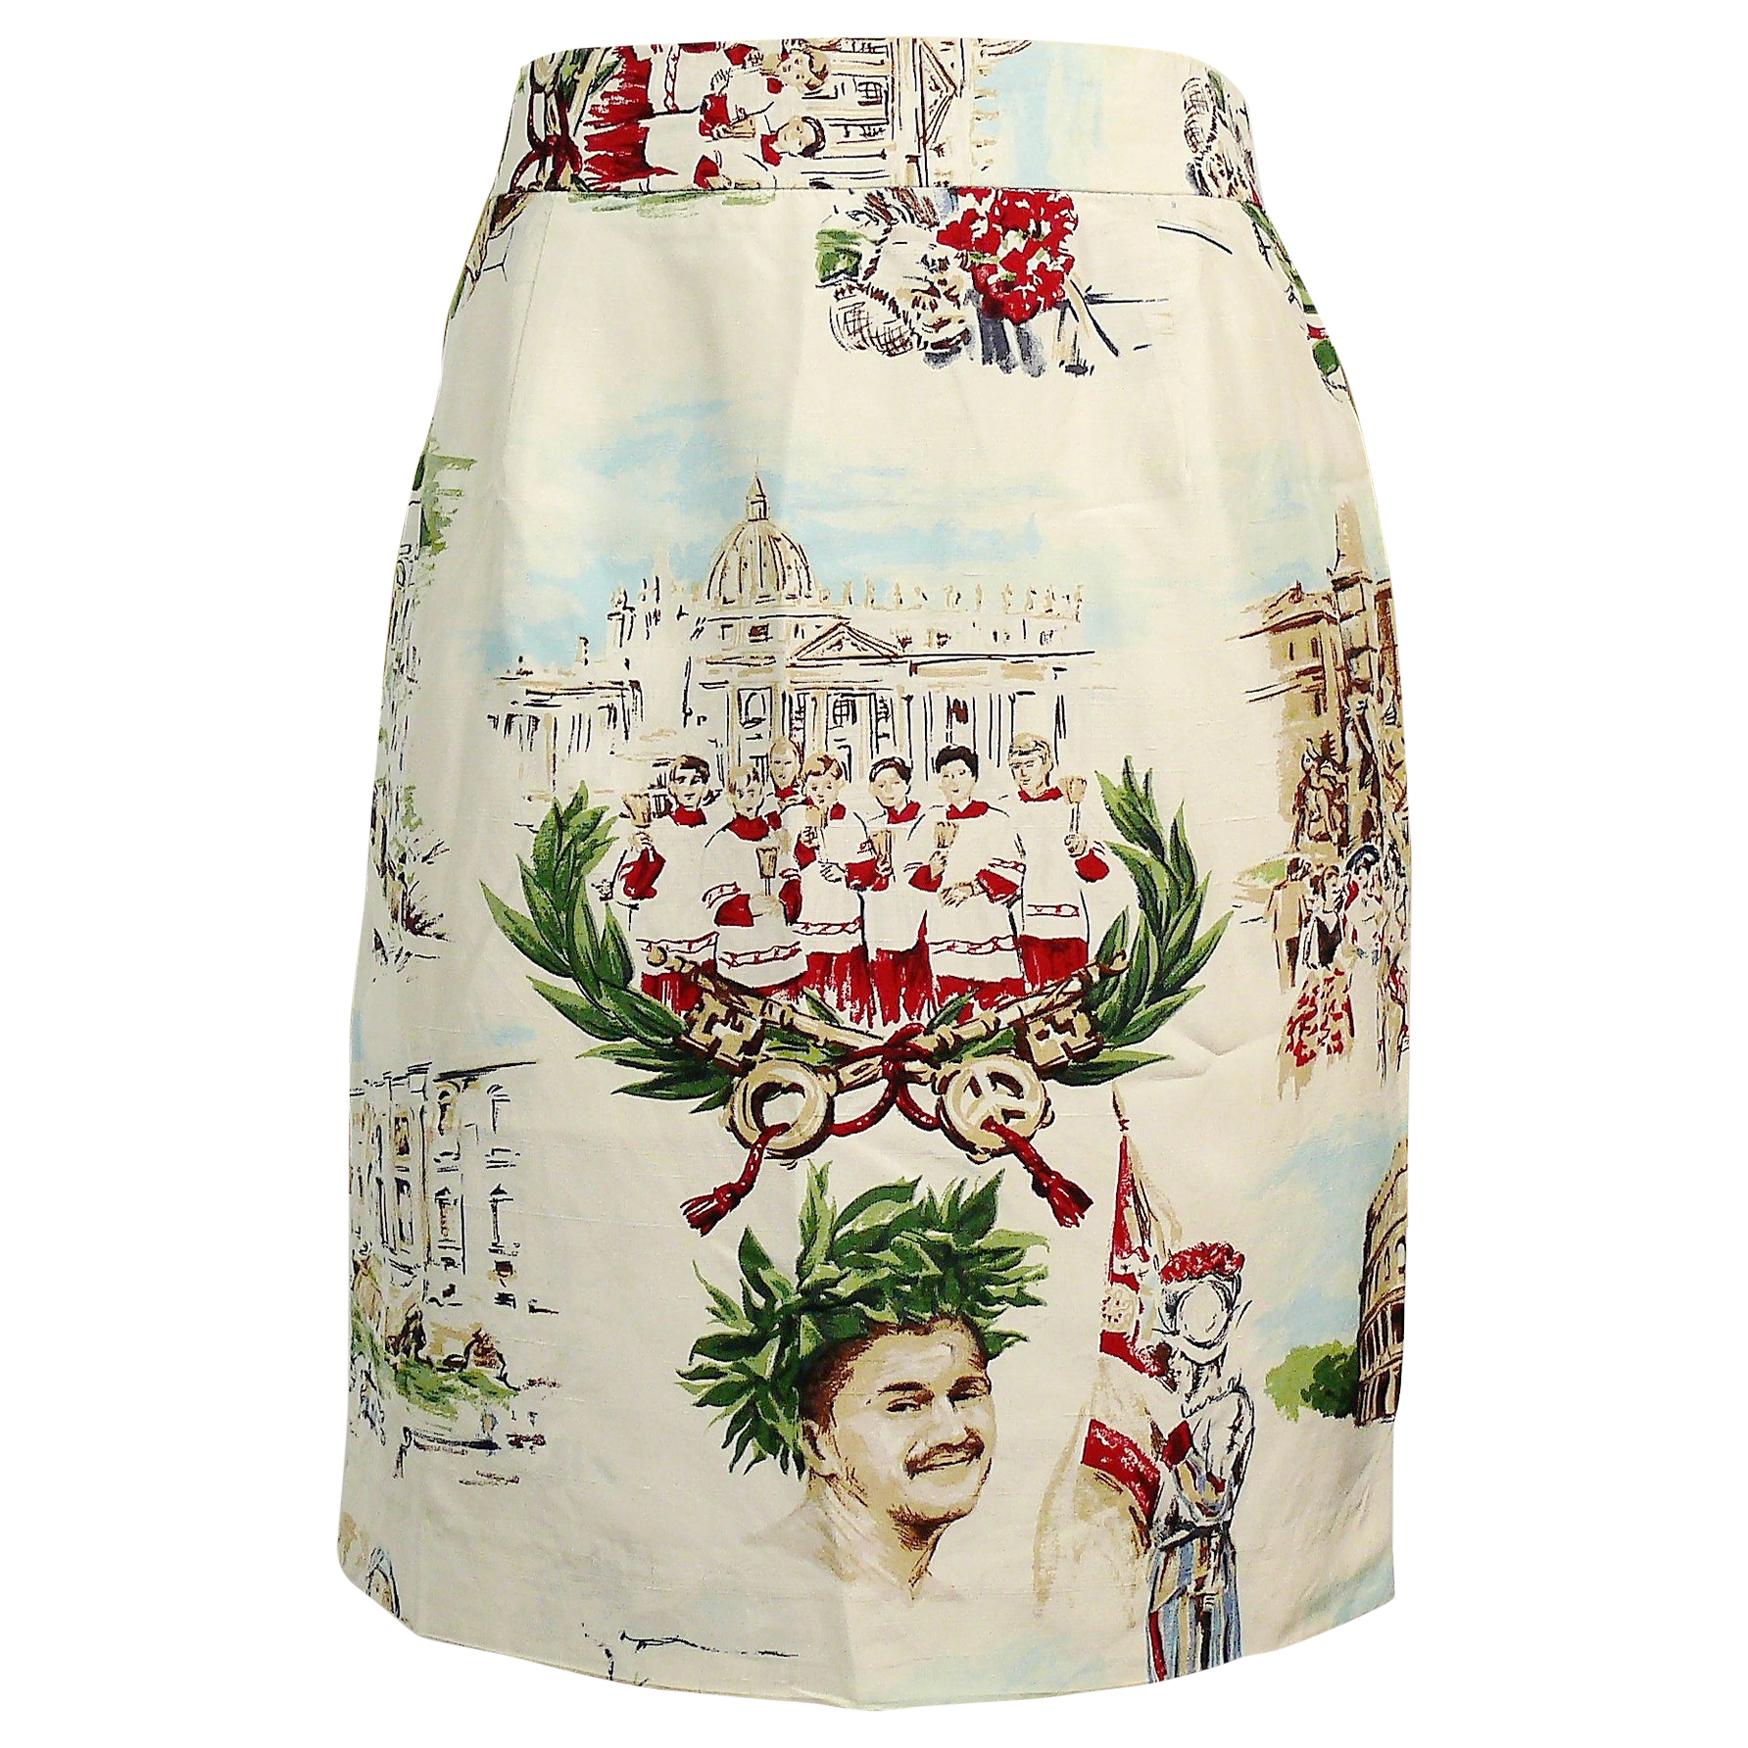 Moschino Couture Rome Scenes and Franco Moschino Emperor Print Skirt US Size 12